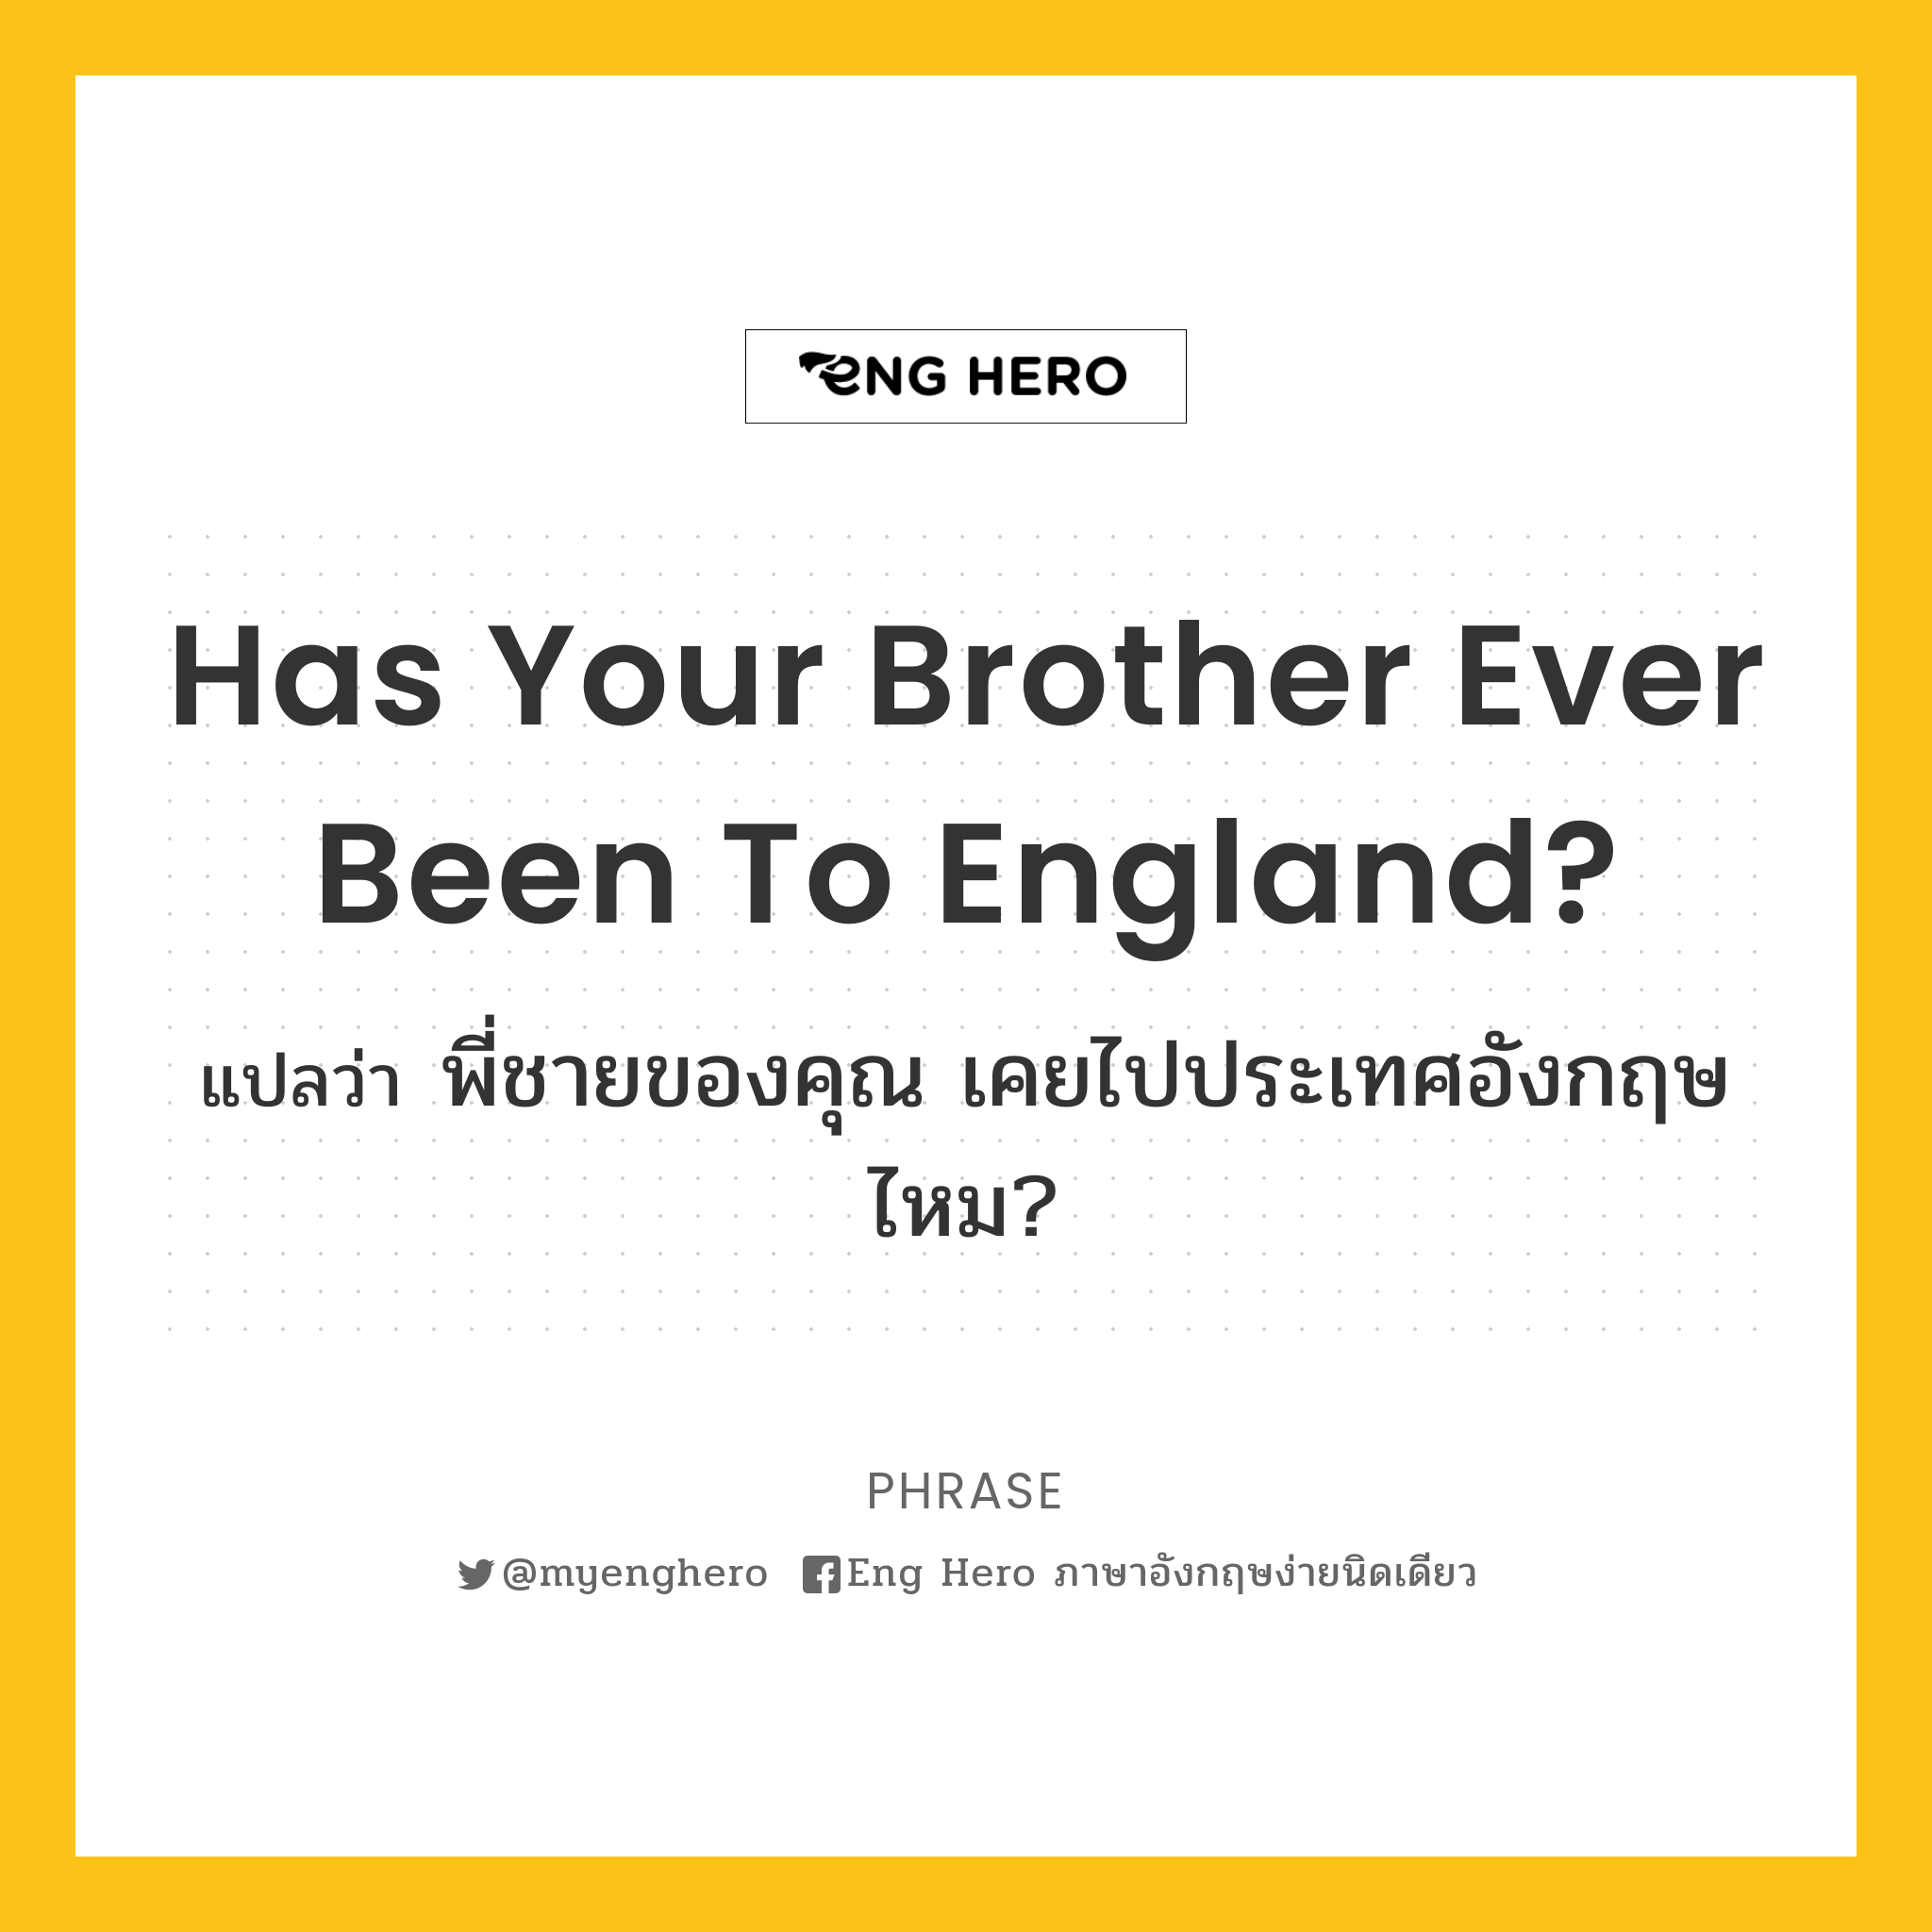 Has your brother ever been to England?